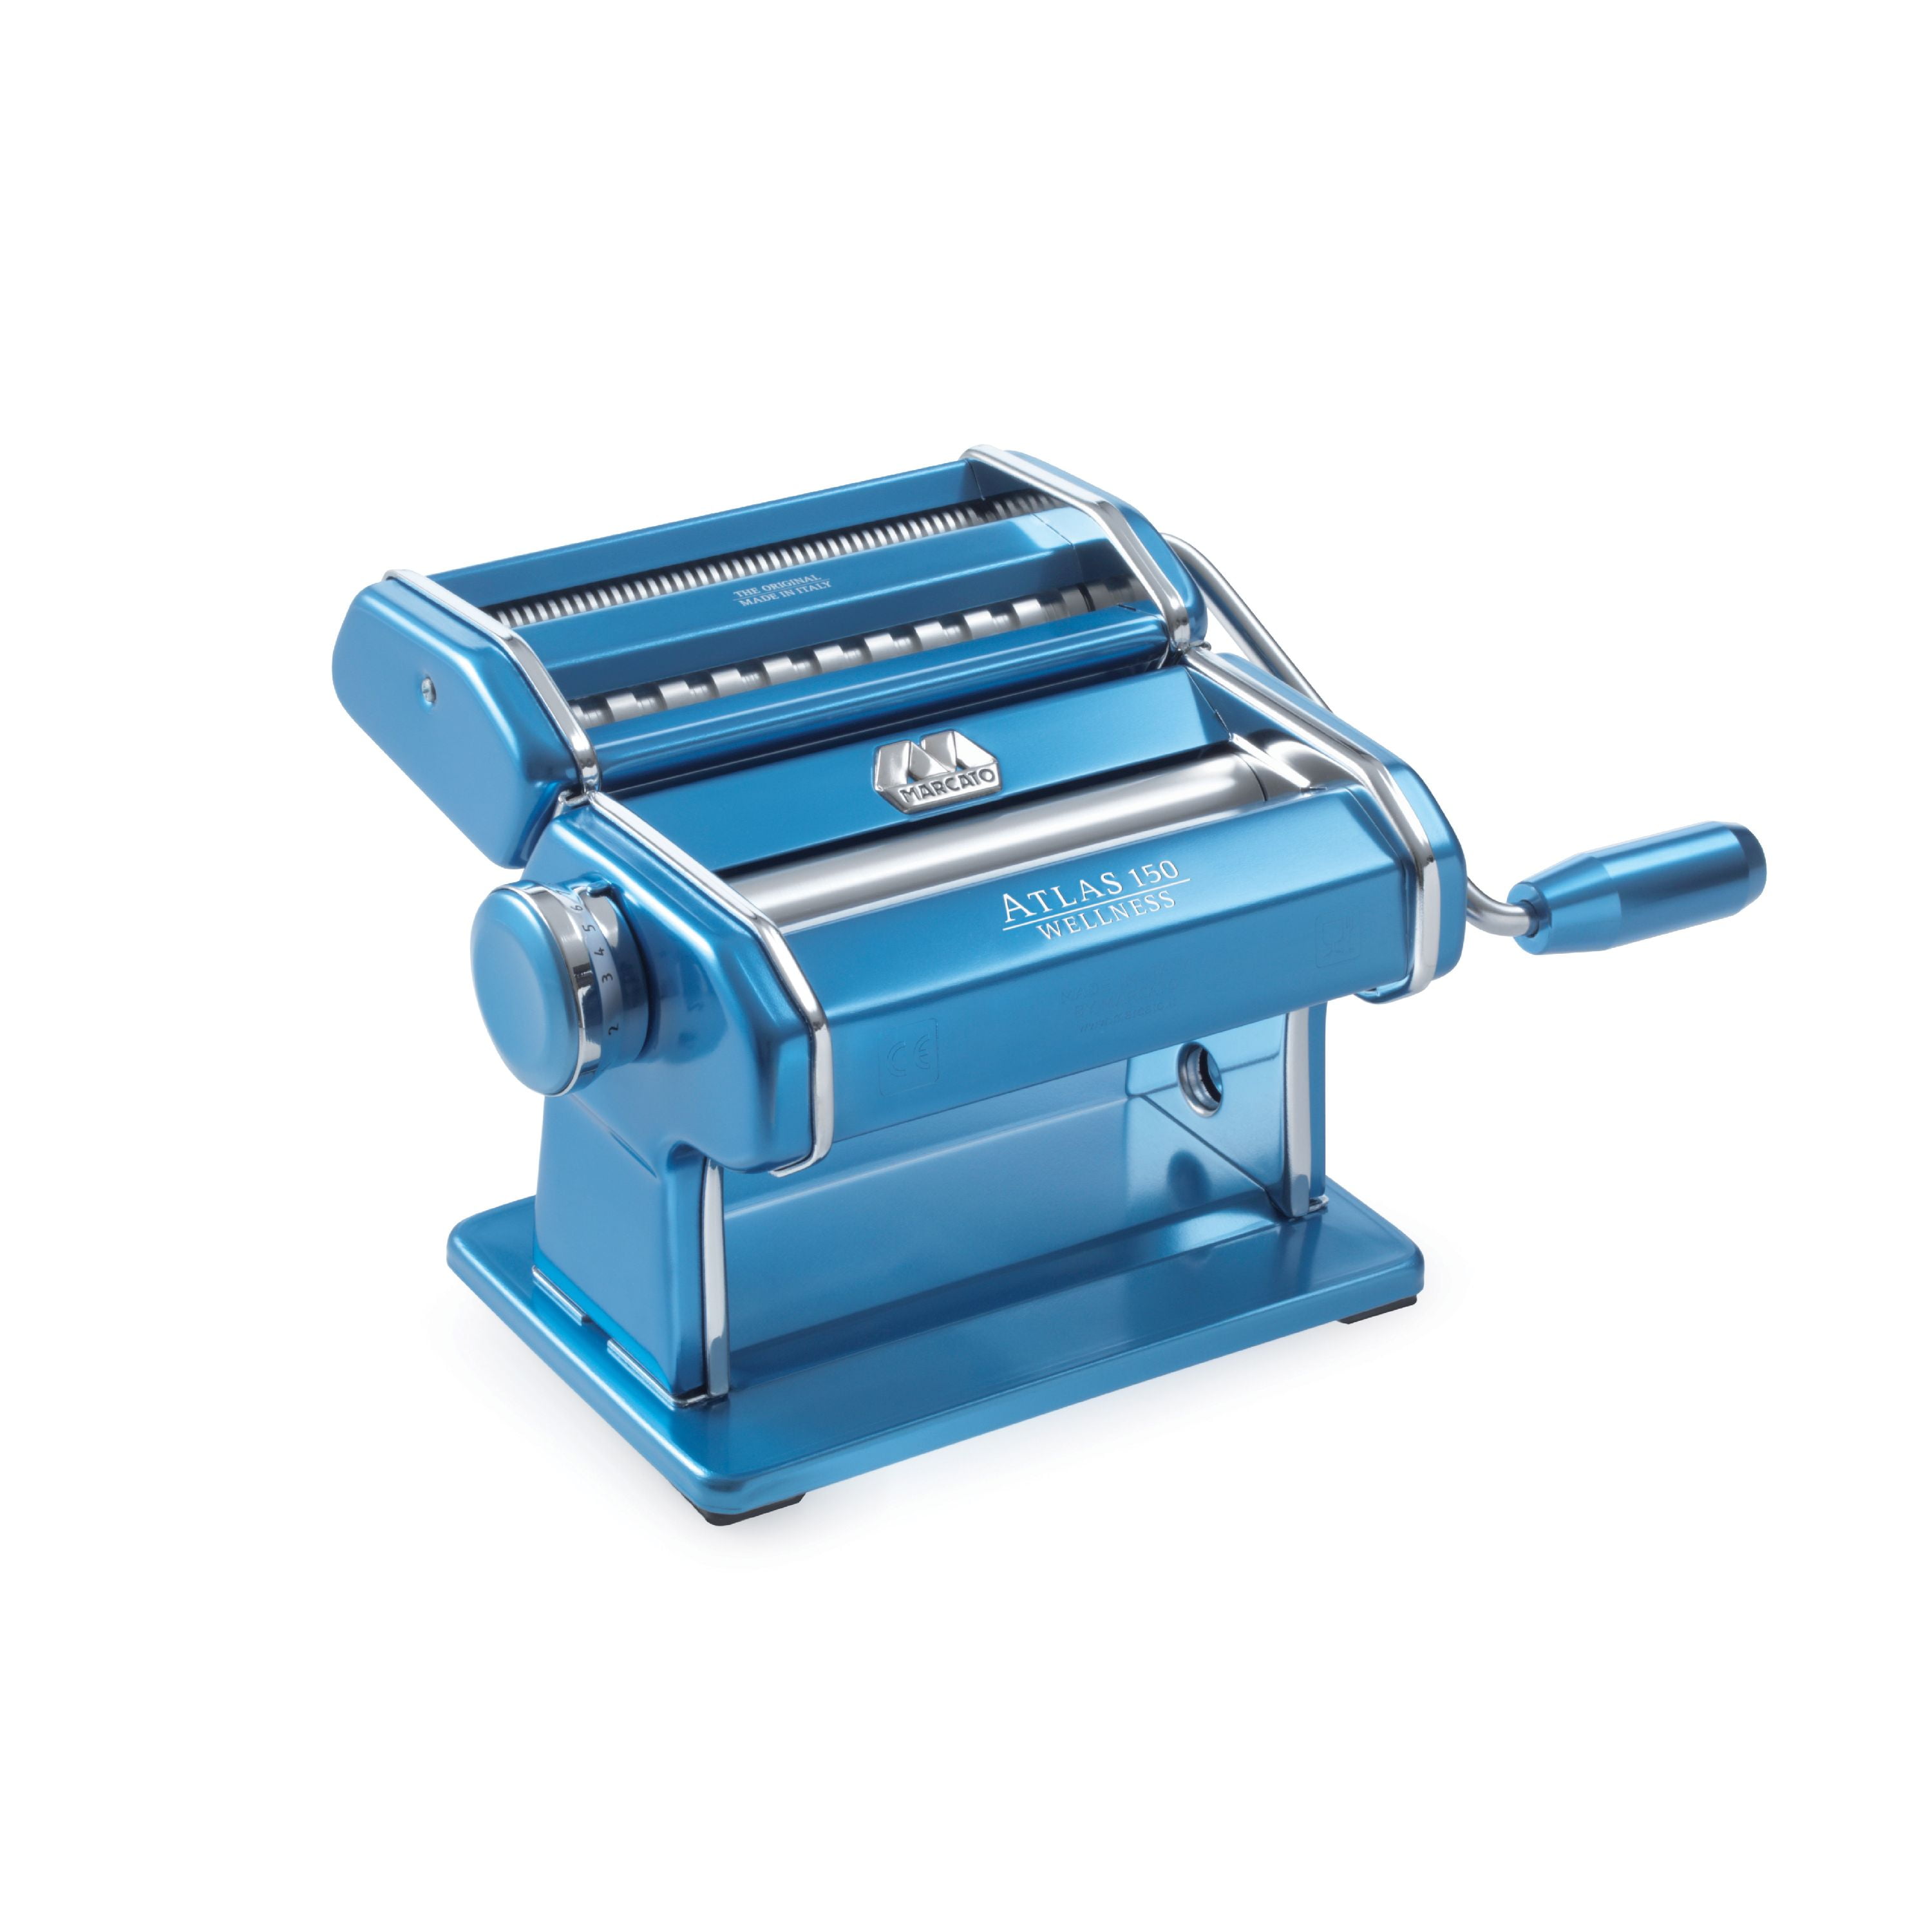 Marcato Atlas 150 Pasta Machine, Made in Red, Pasta Cutter, Hand Crank, and Instructions - Walmart.com